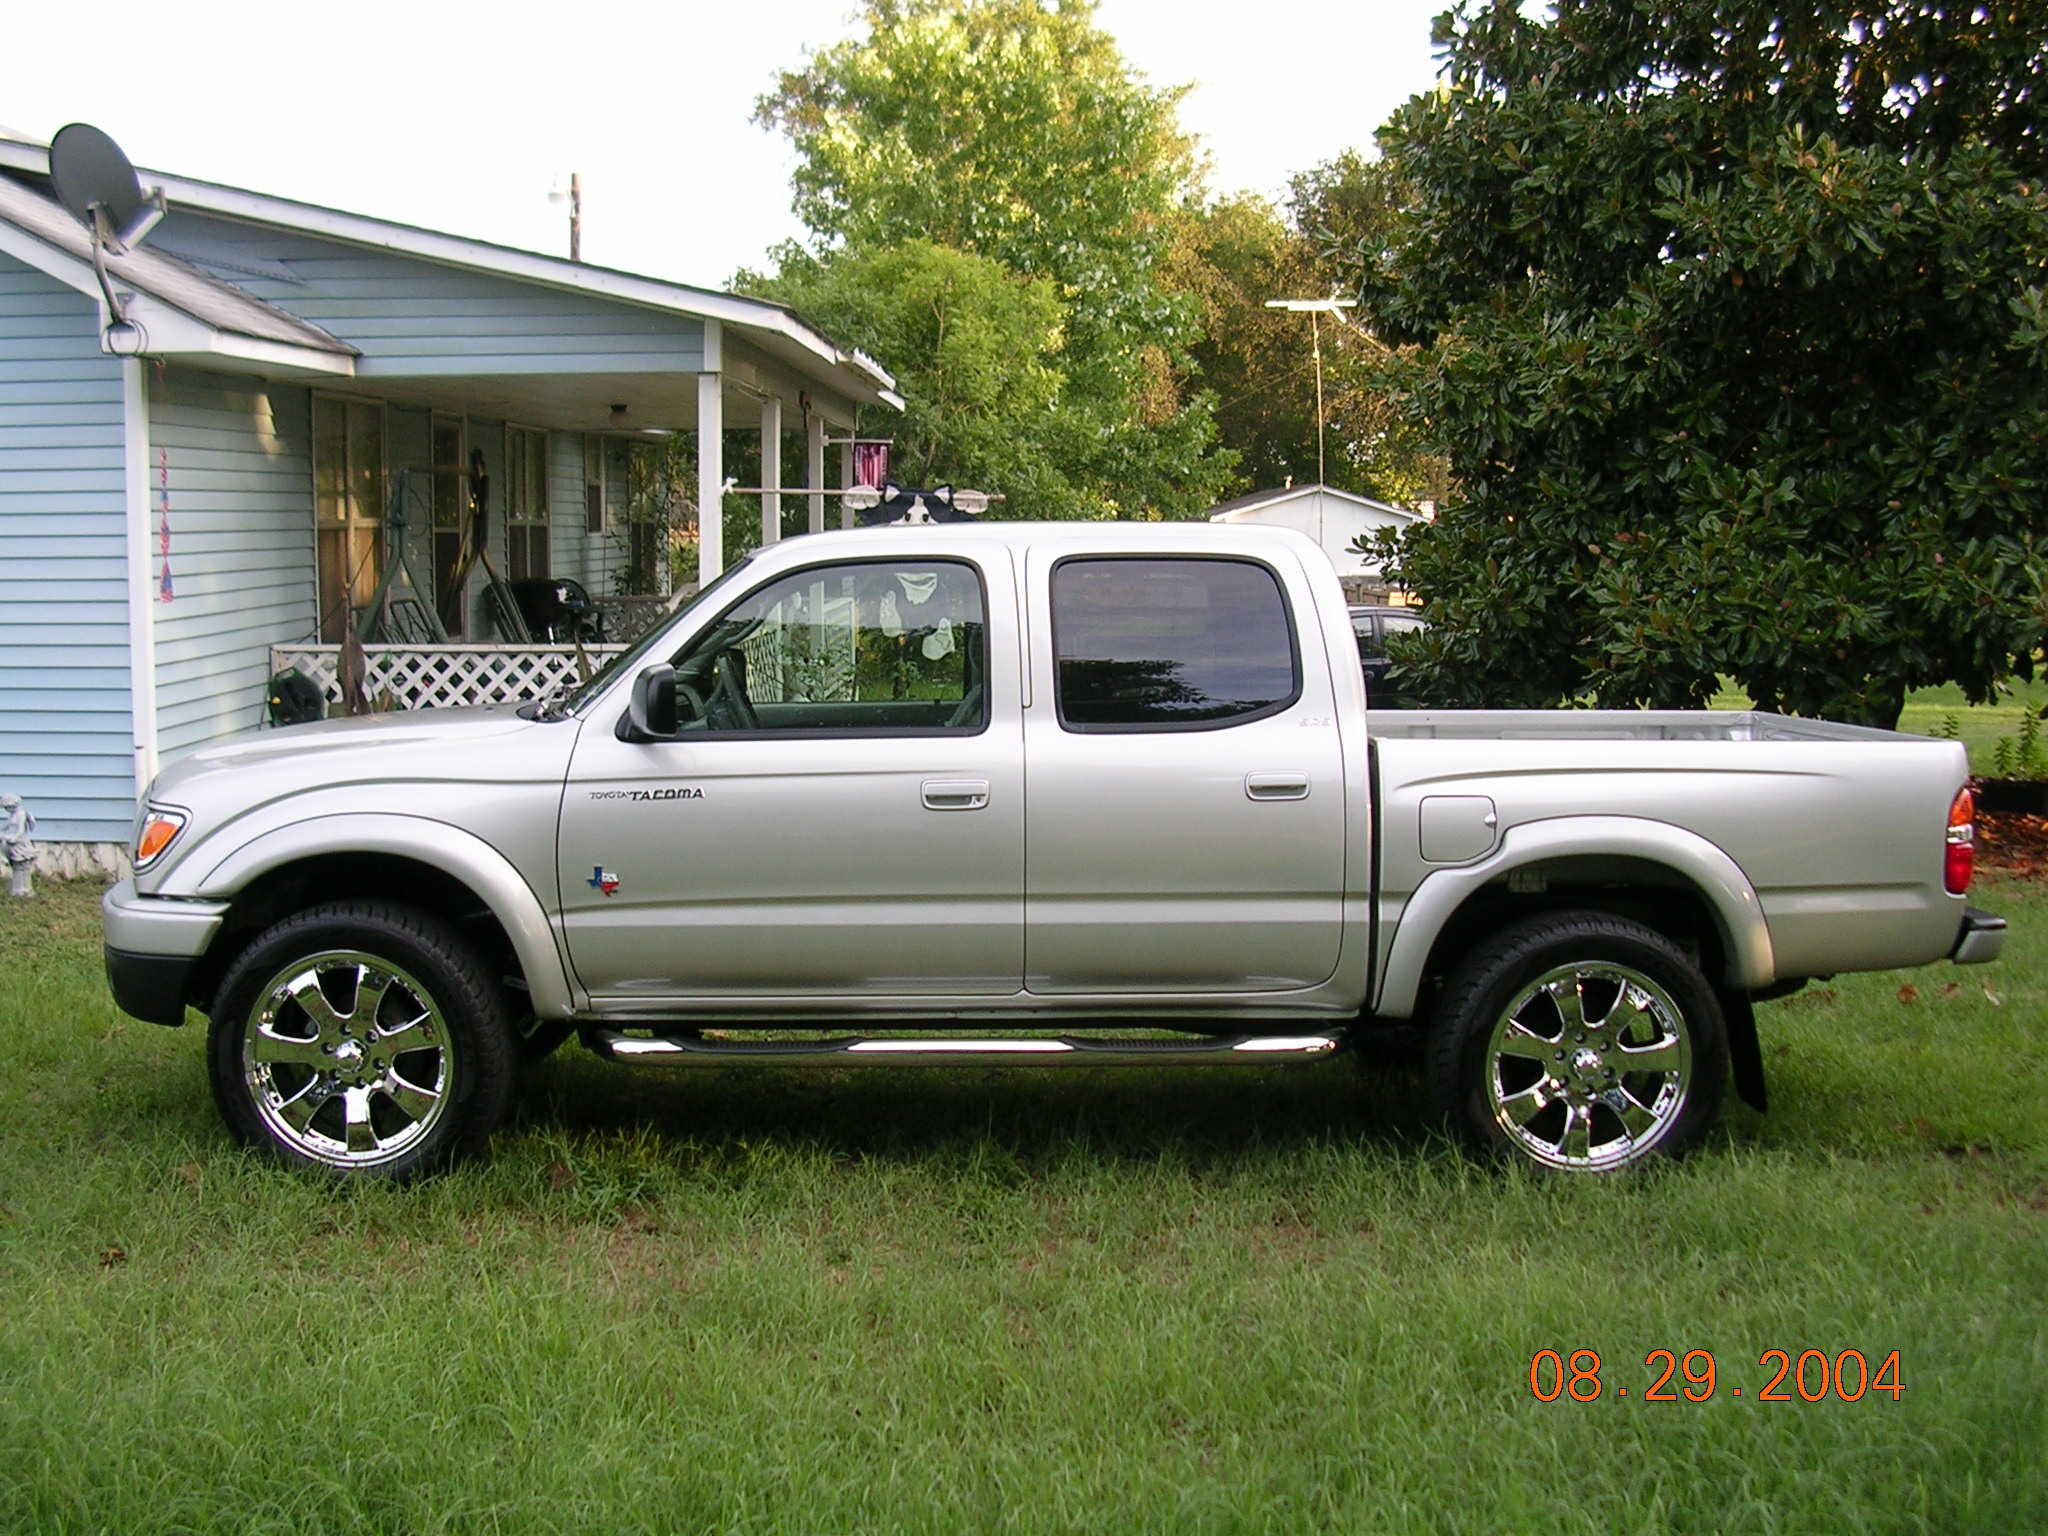 2004 picture tacoma toyota #5